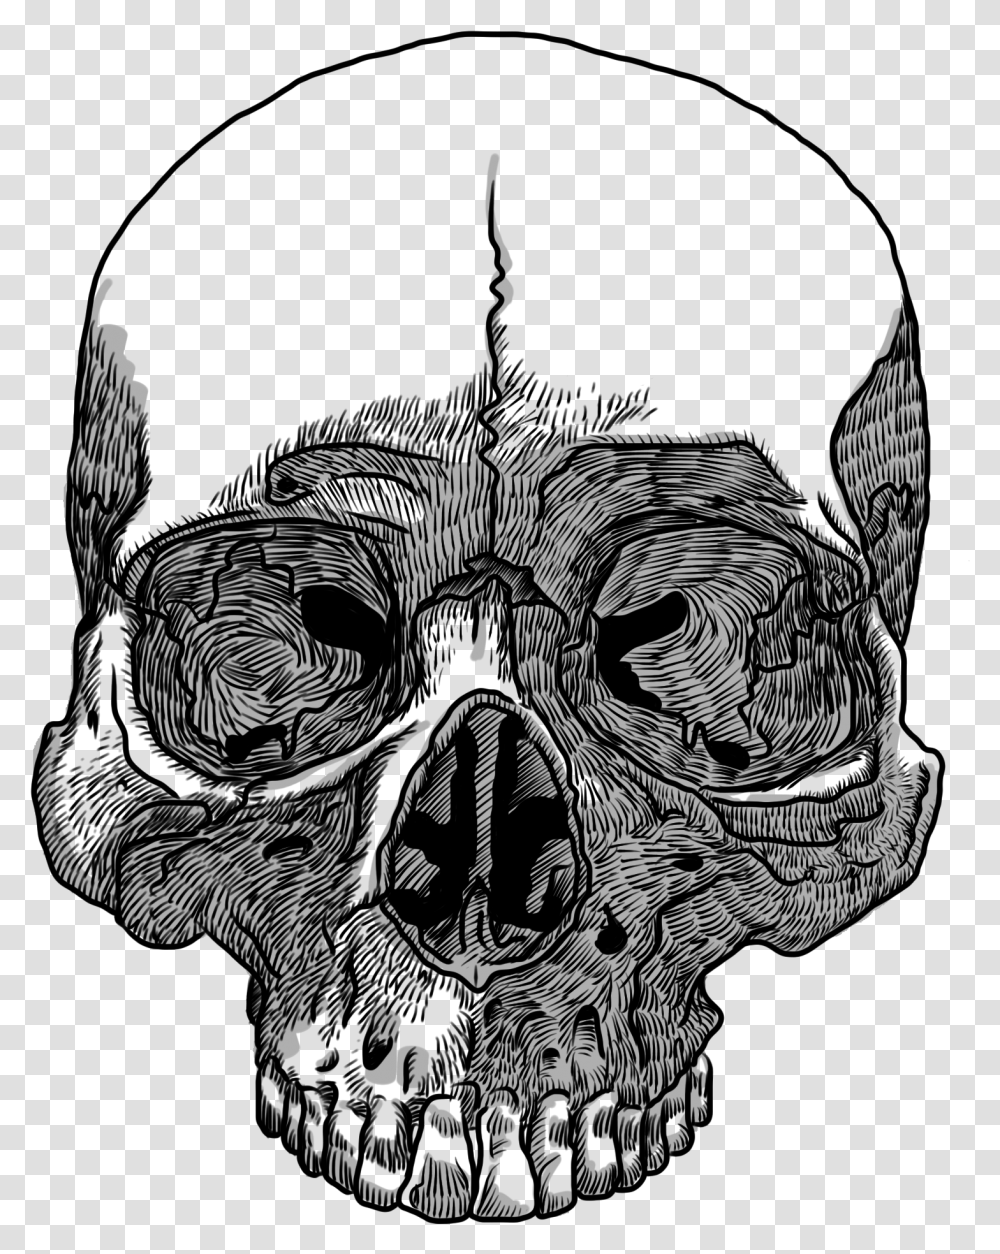 Skull Drawing Transparency And Translucency Clip Art Background Skull Drawing, Stencil, Lamp, Pattern Transparent Png